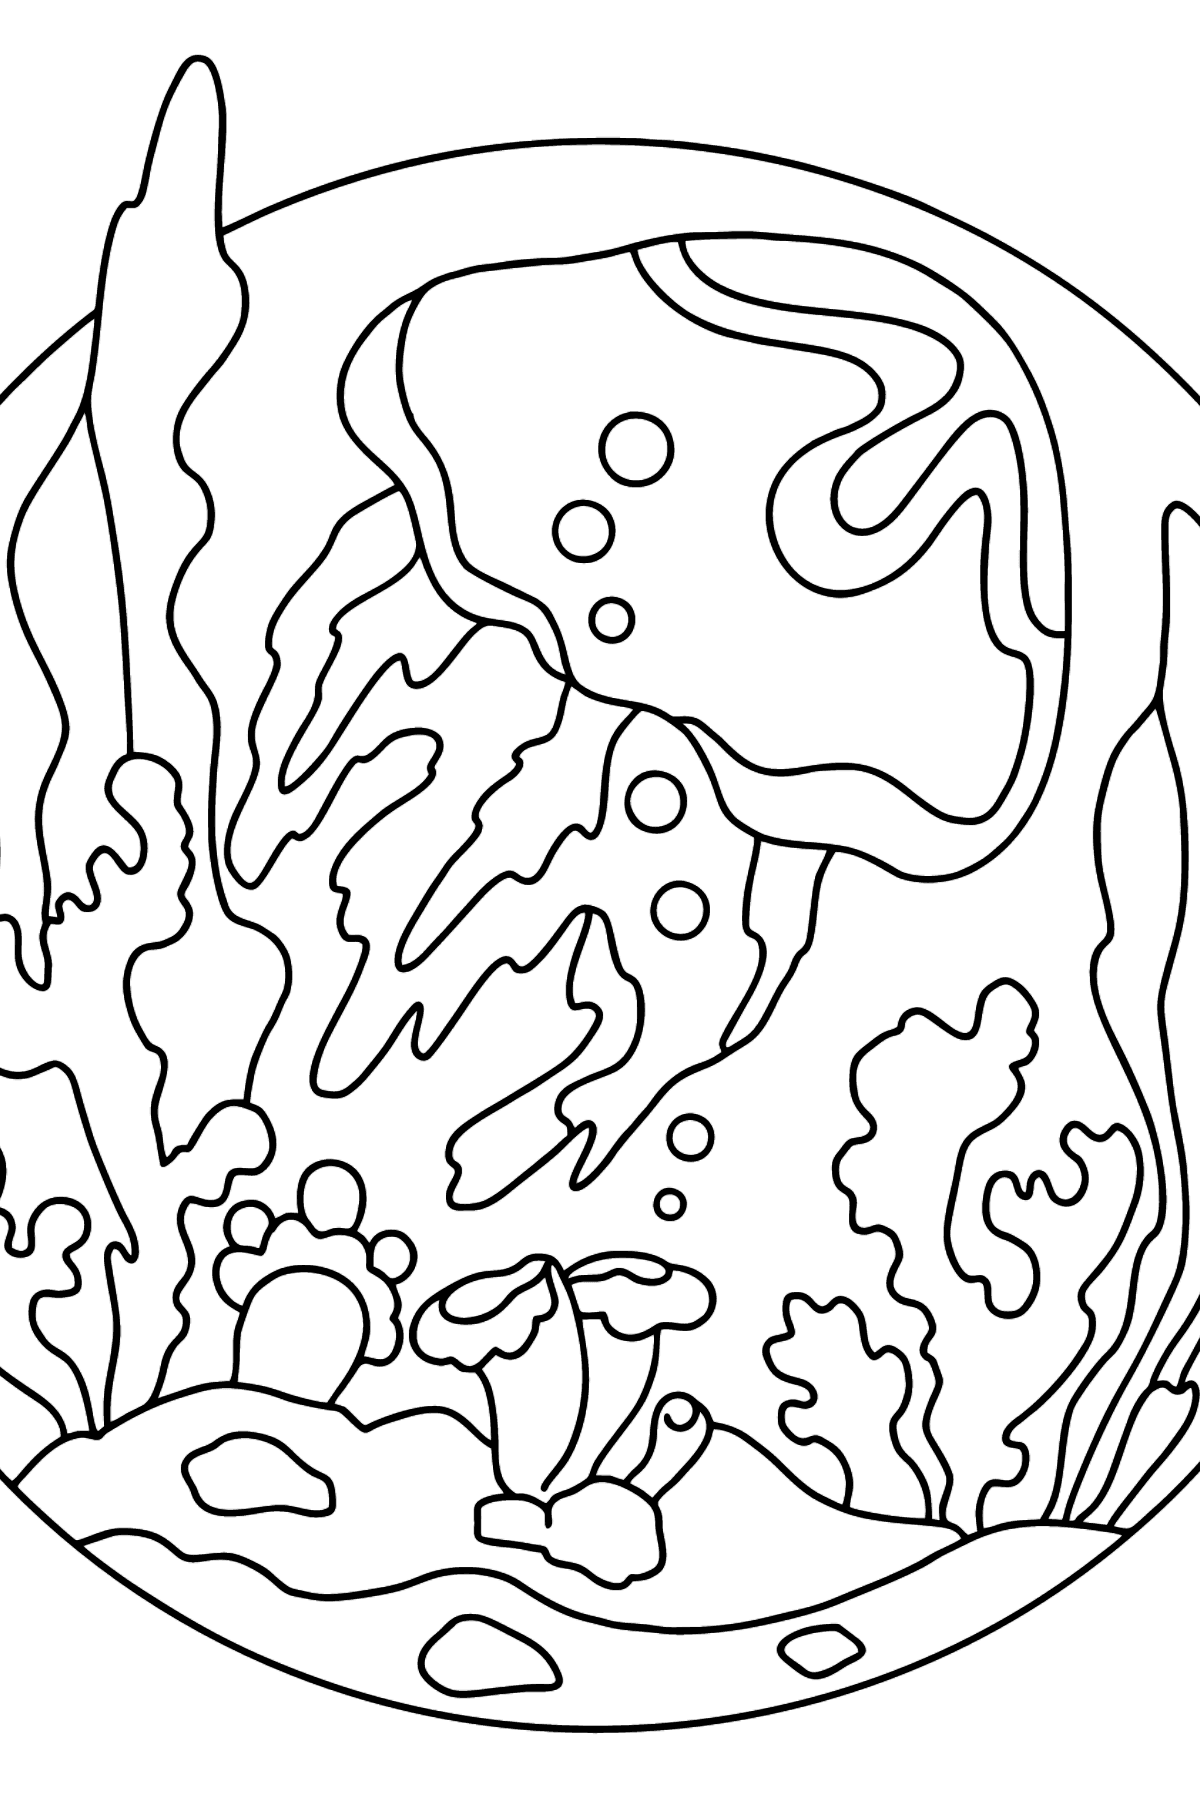 Jellyfish Coloring Page (Difficult) - Coloring Pages for Kids